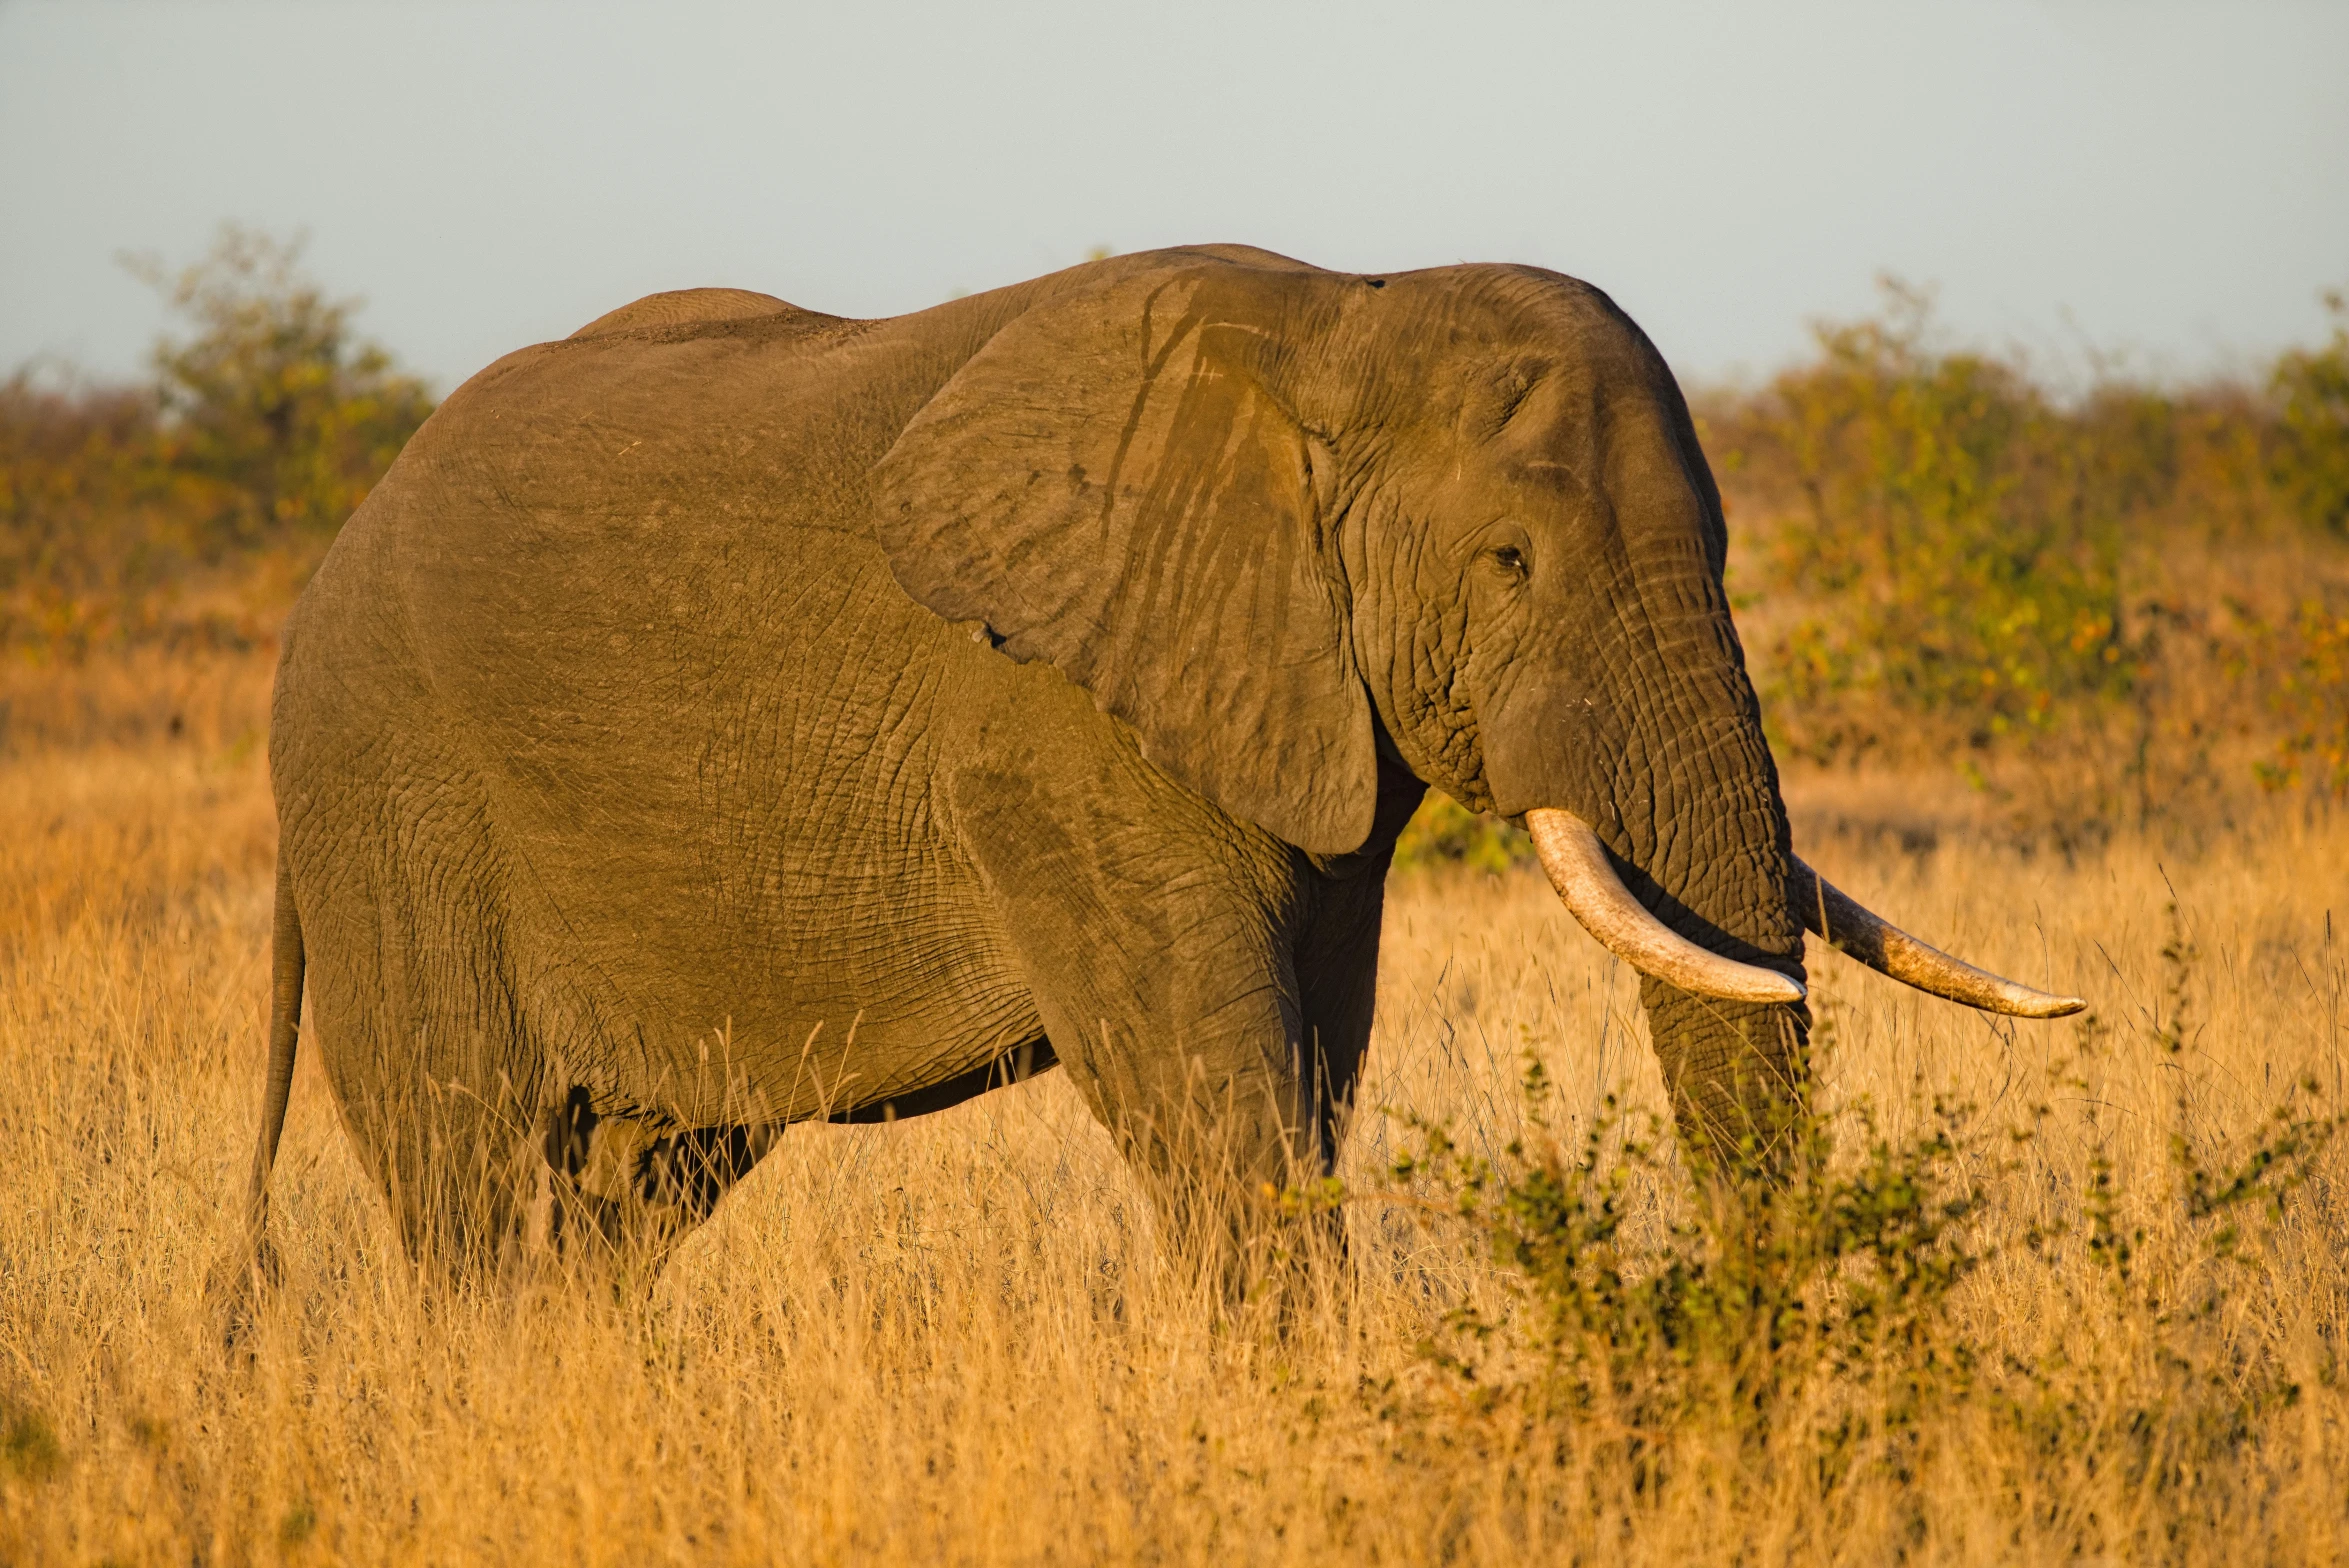 a large elephant standing on top of a dry grass field, at the golden hour, portrait”